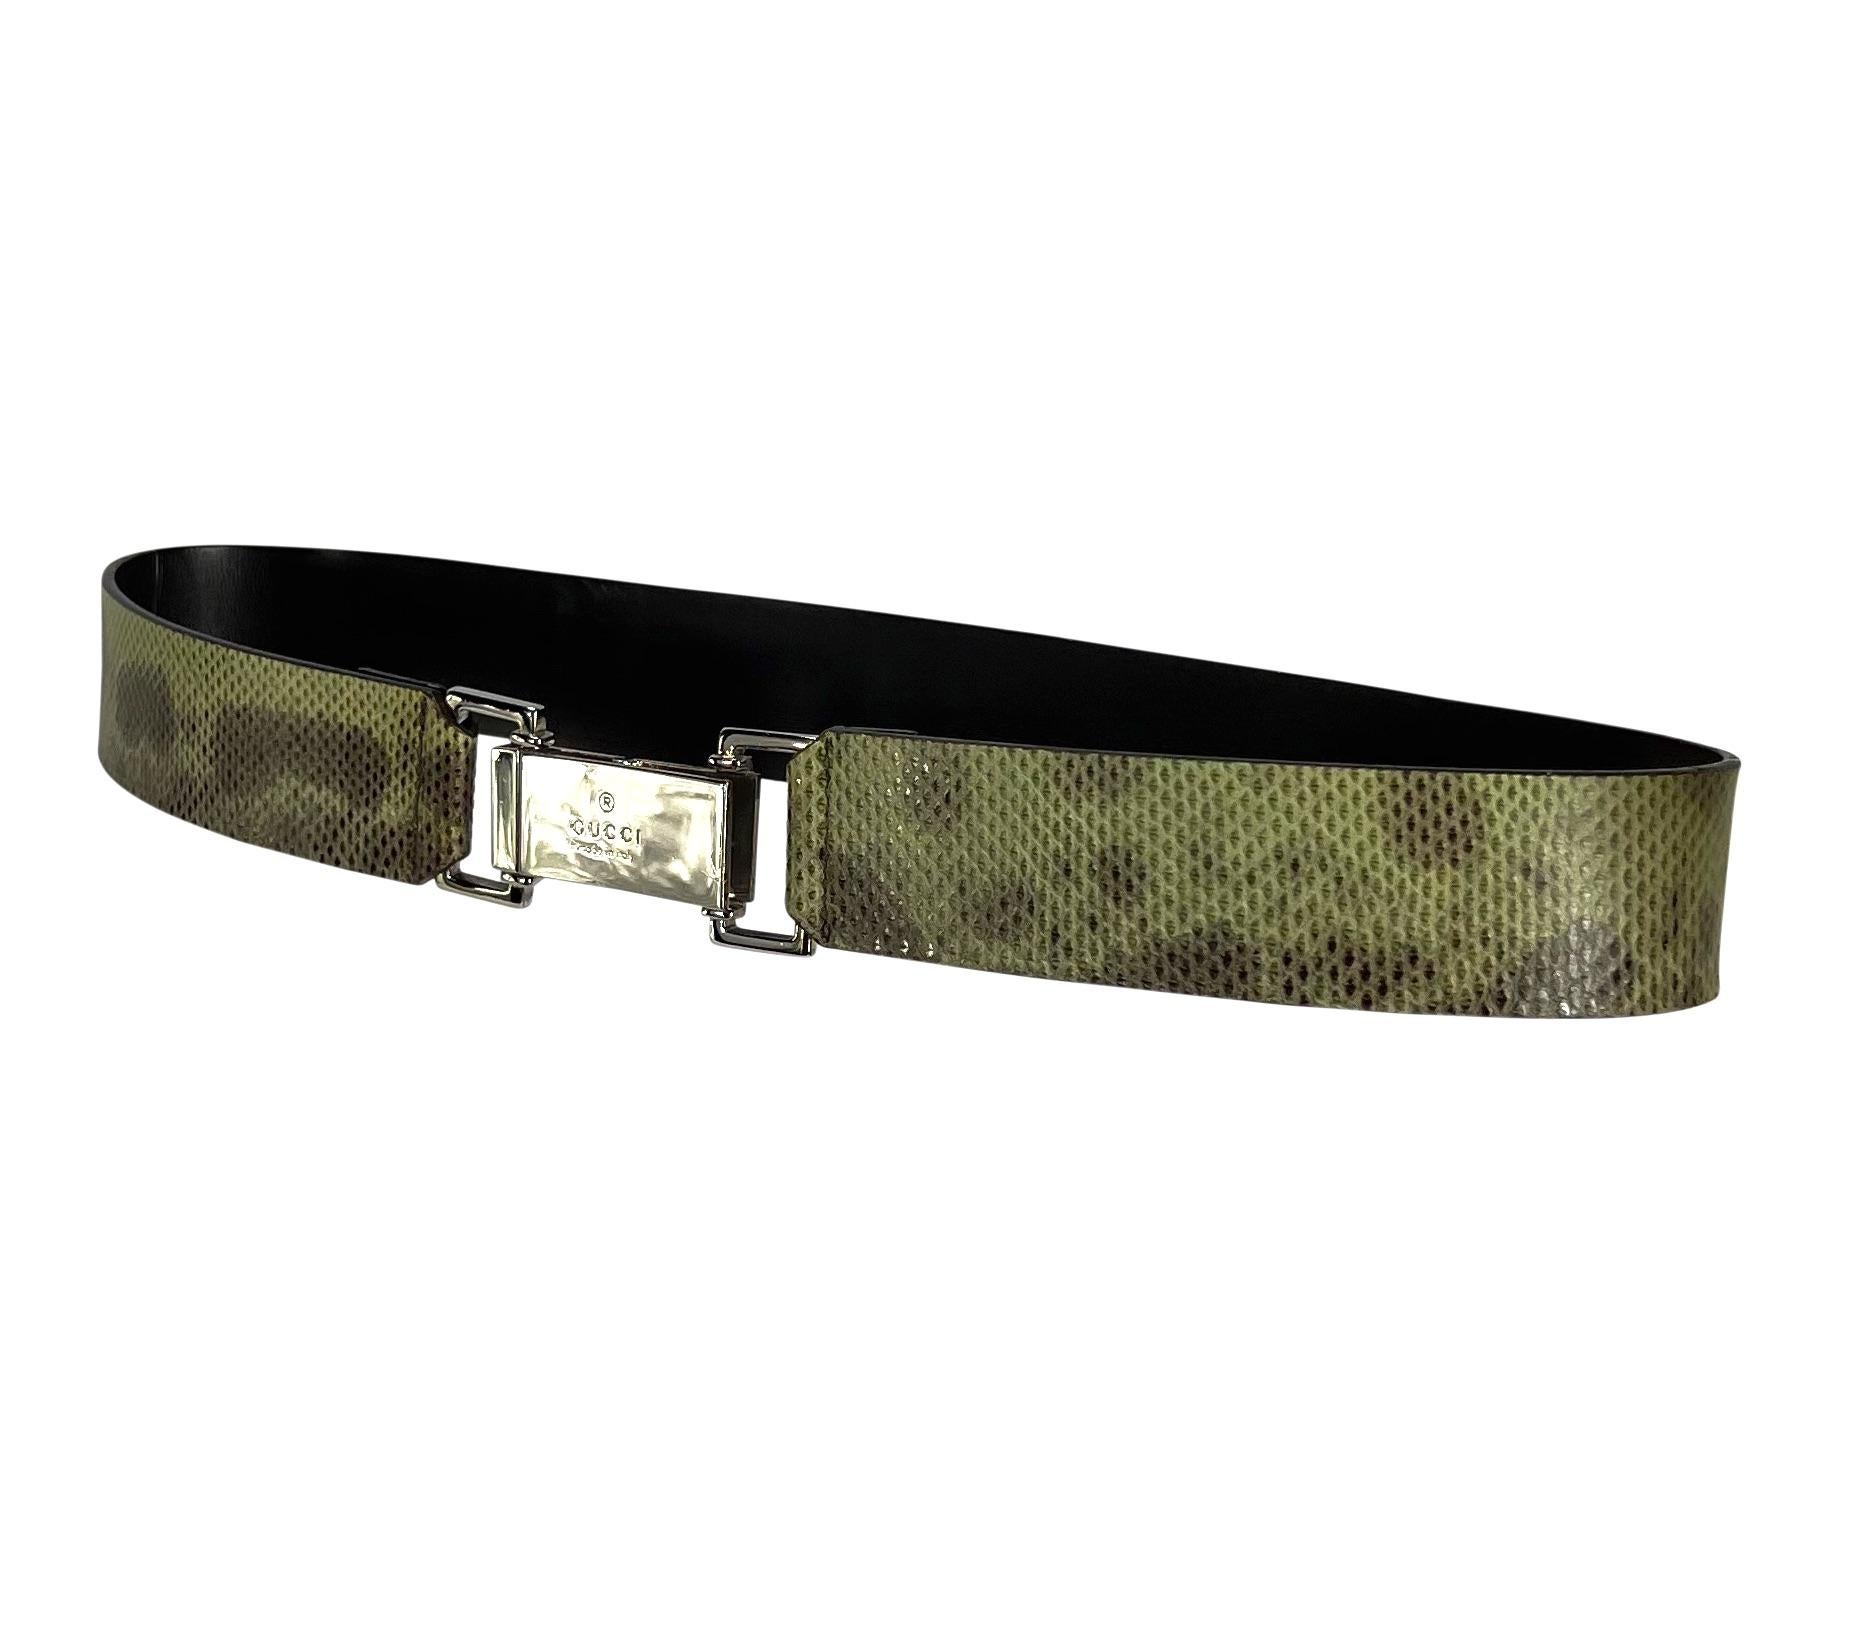 Presenting a fabulous watersnake skin Gucci belt, designed by Tom Ford. From the Spring/Summer 2000 collection, this belt features a natural watersnake skin strap and is made complete with a silver-tone clip buckle.

Approximate Measurements: